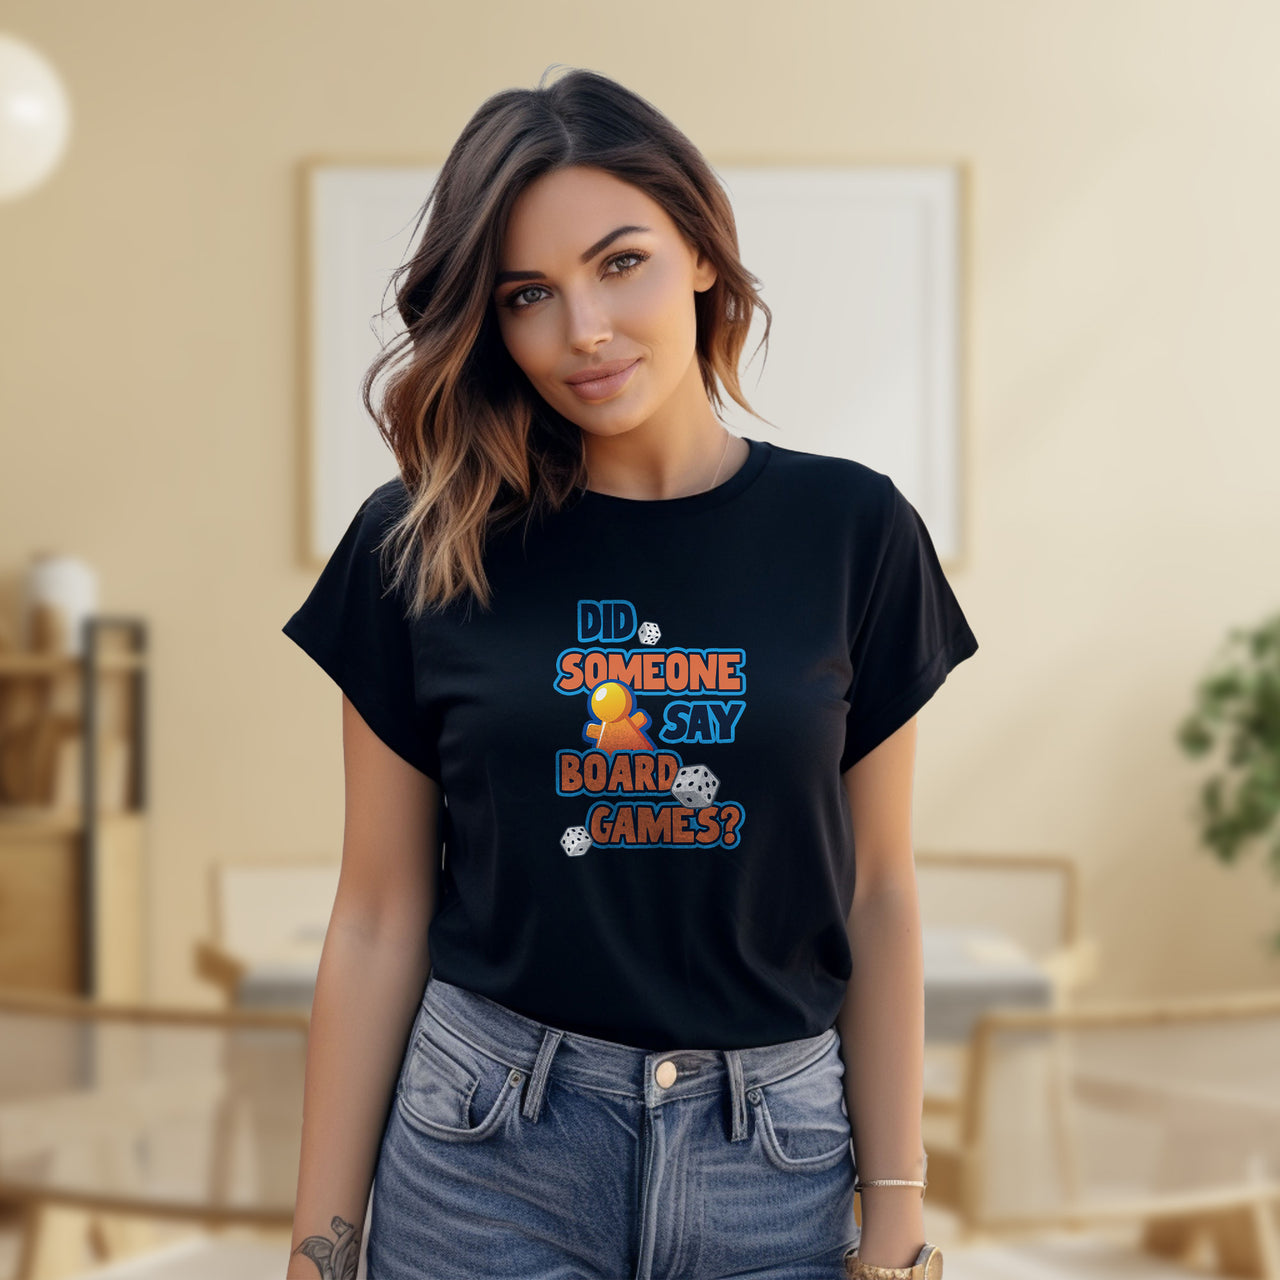 Did Someone Say Board Games T-shirt